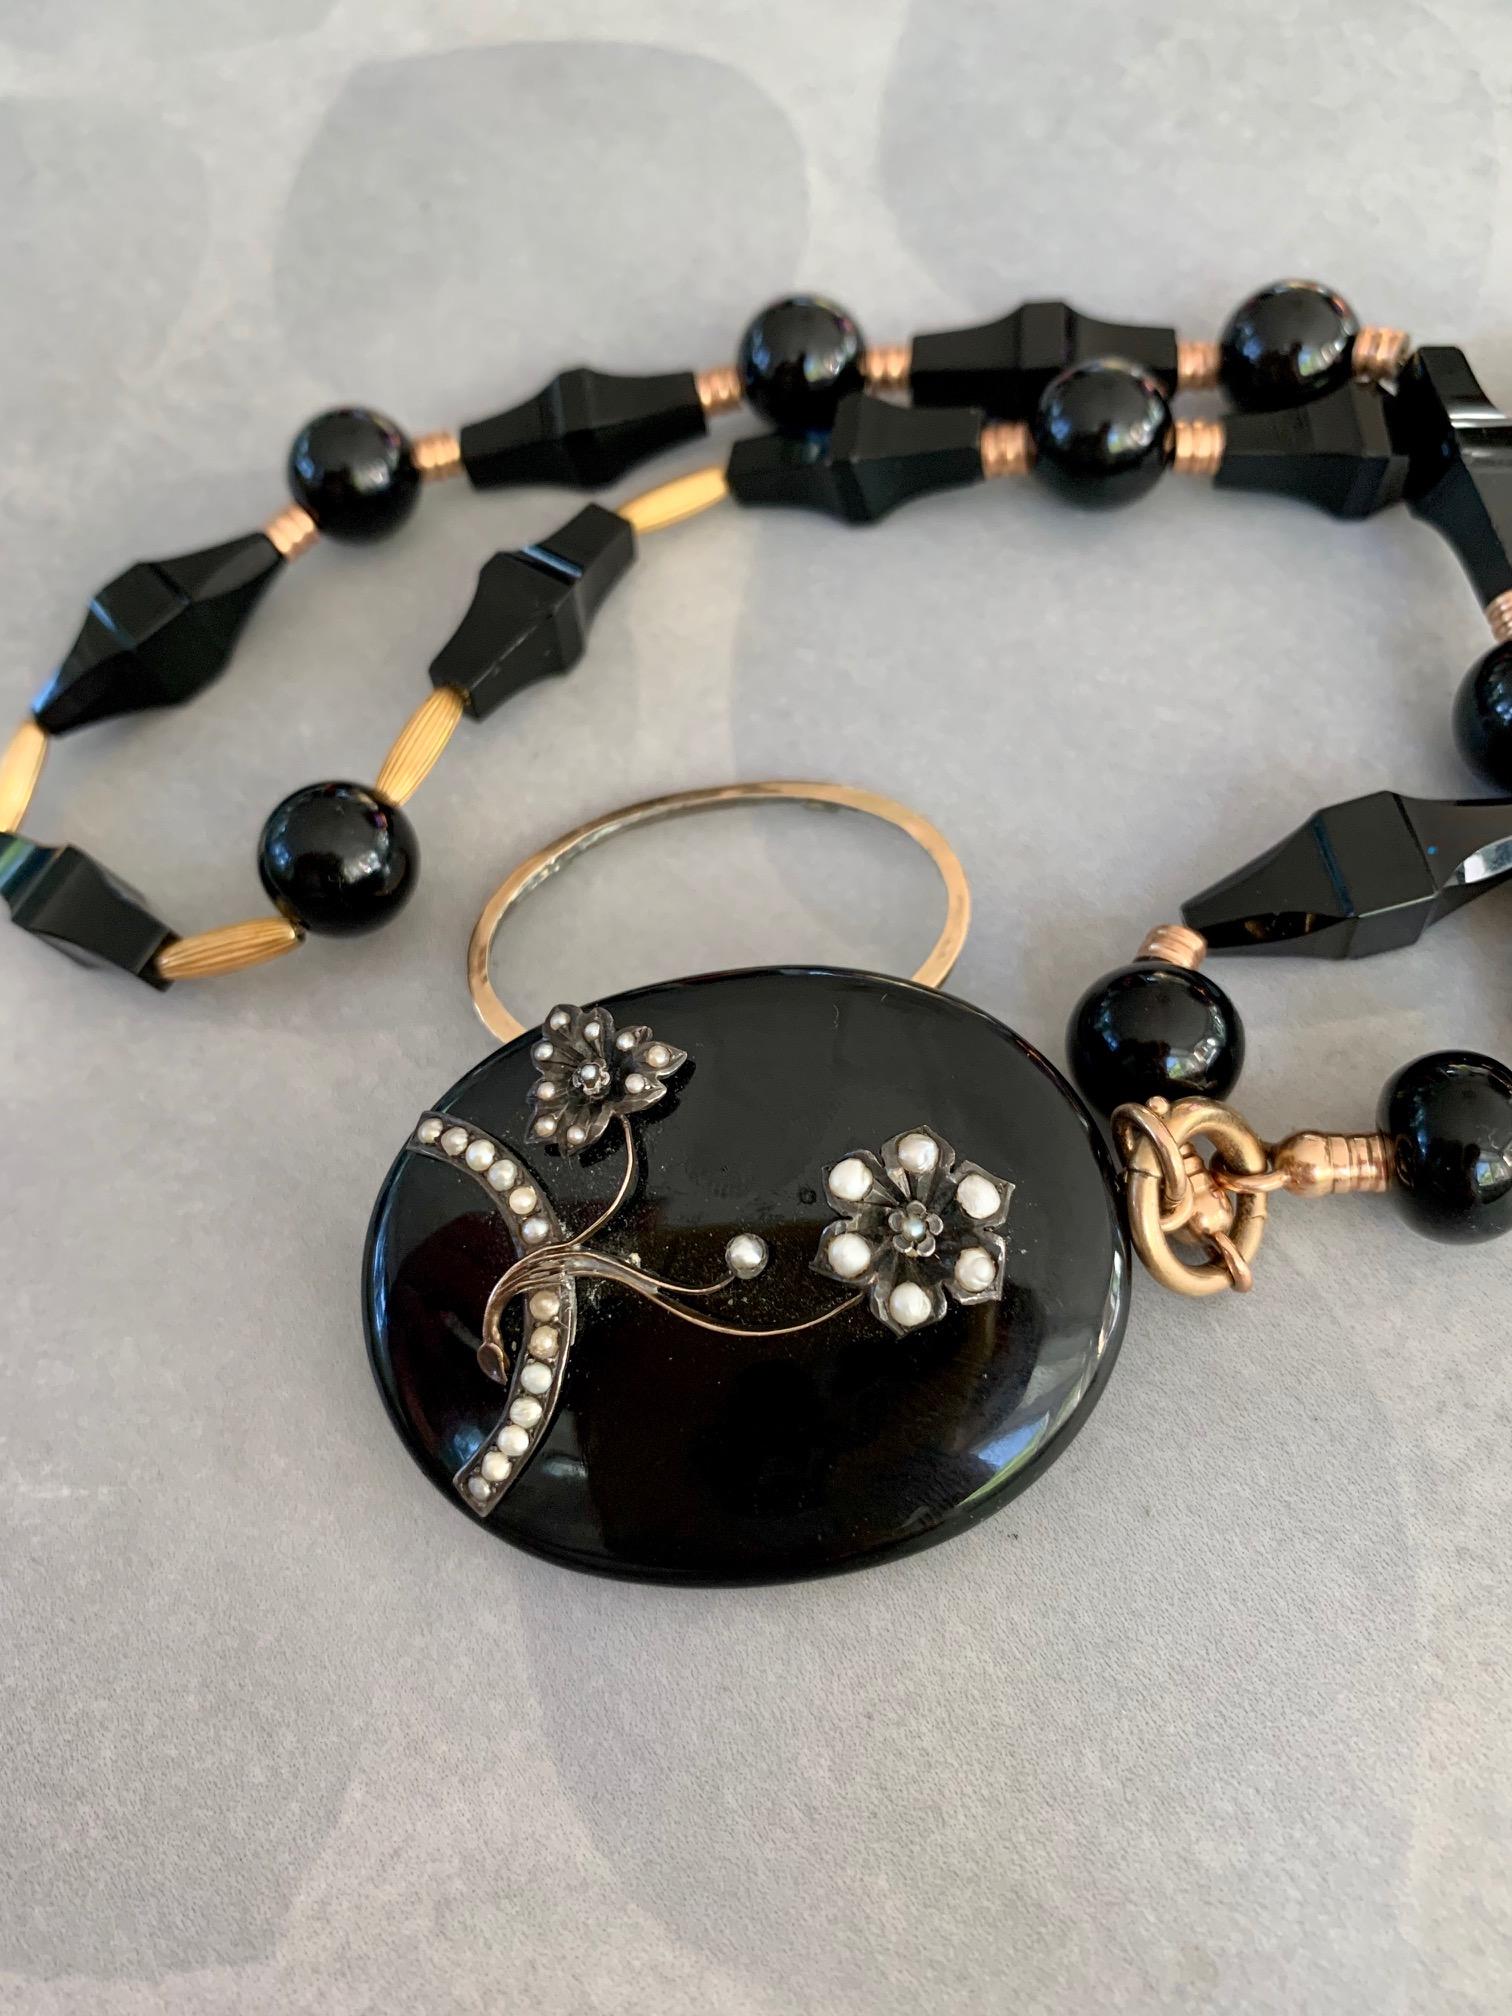 This stunning mourning locket and necklace are made with black Onyx as the featured stone.  It has been accented with seed Pearls on the front of the locket. The necklace features black Onyx beads of various shapes which are alternated with Gold